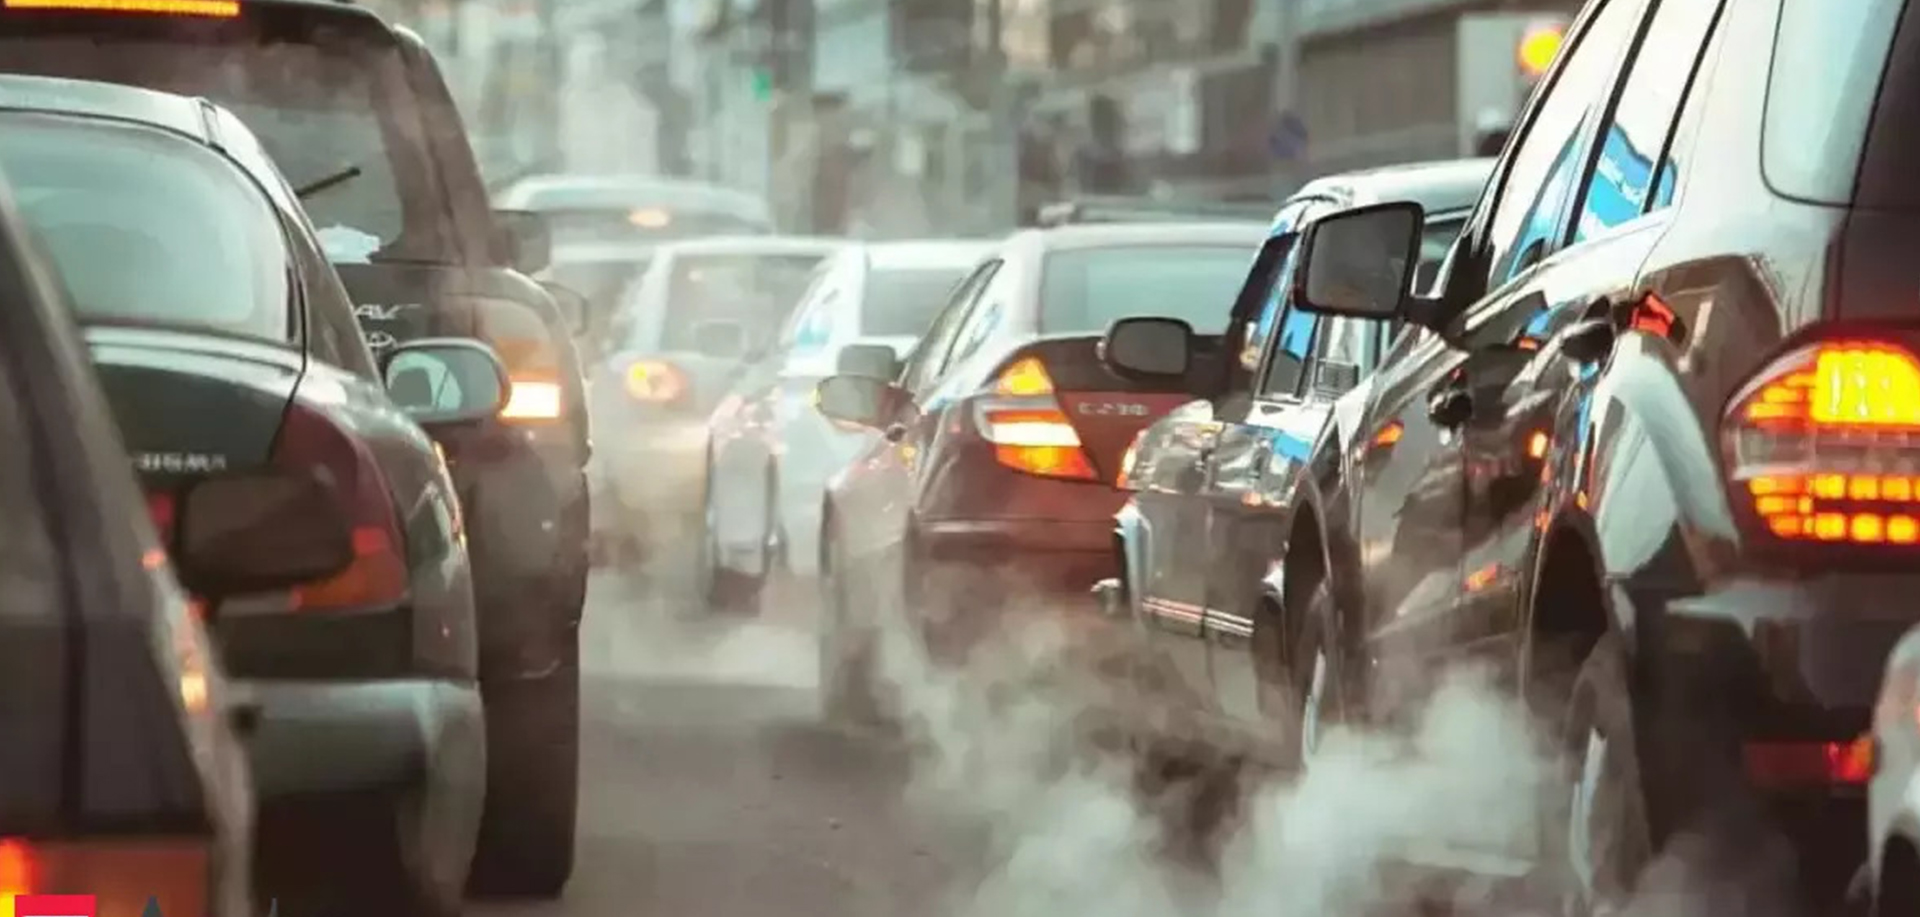 How is Air Pollution caused by Vehicles?